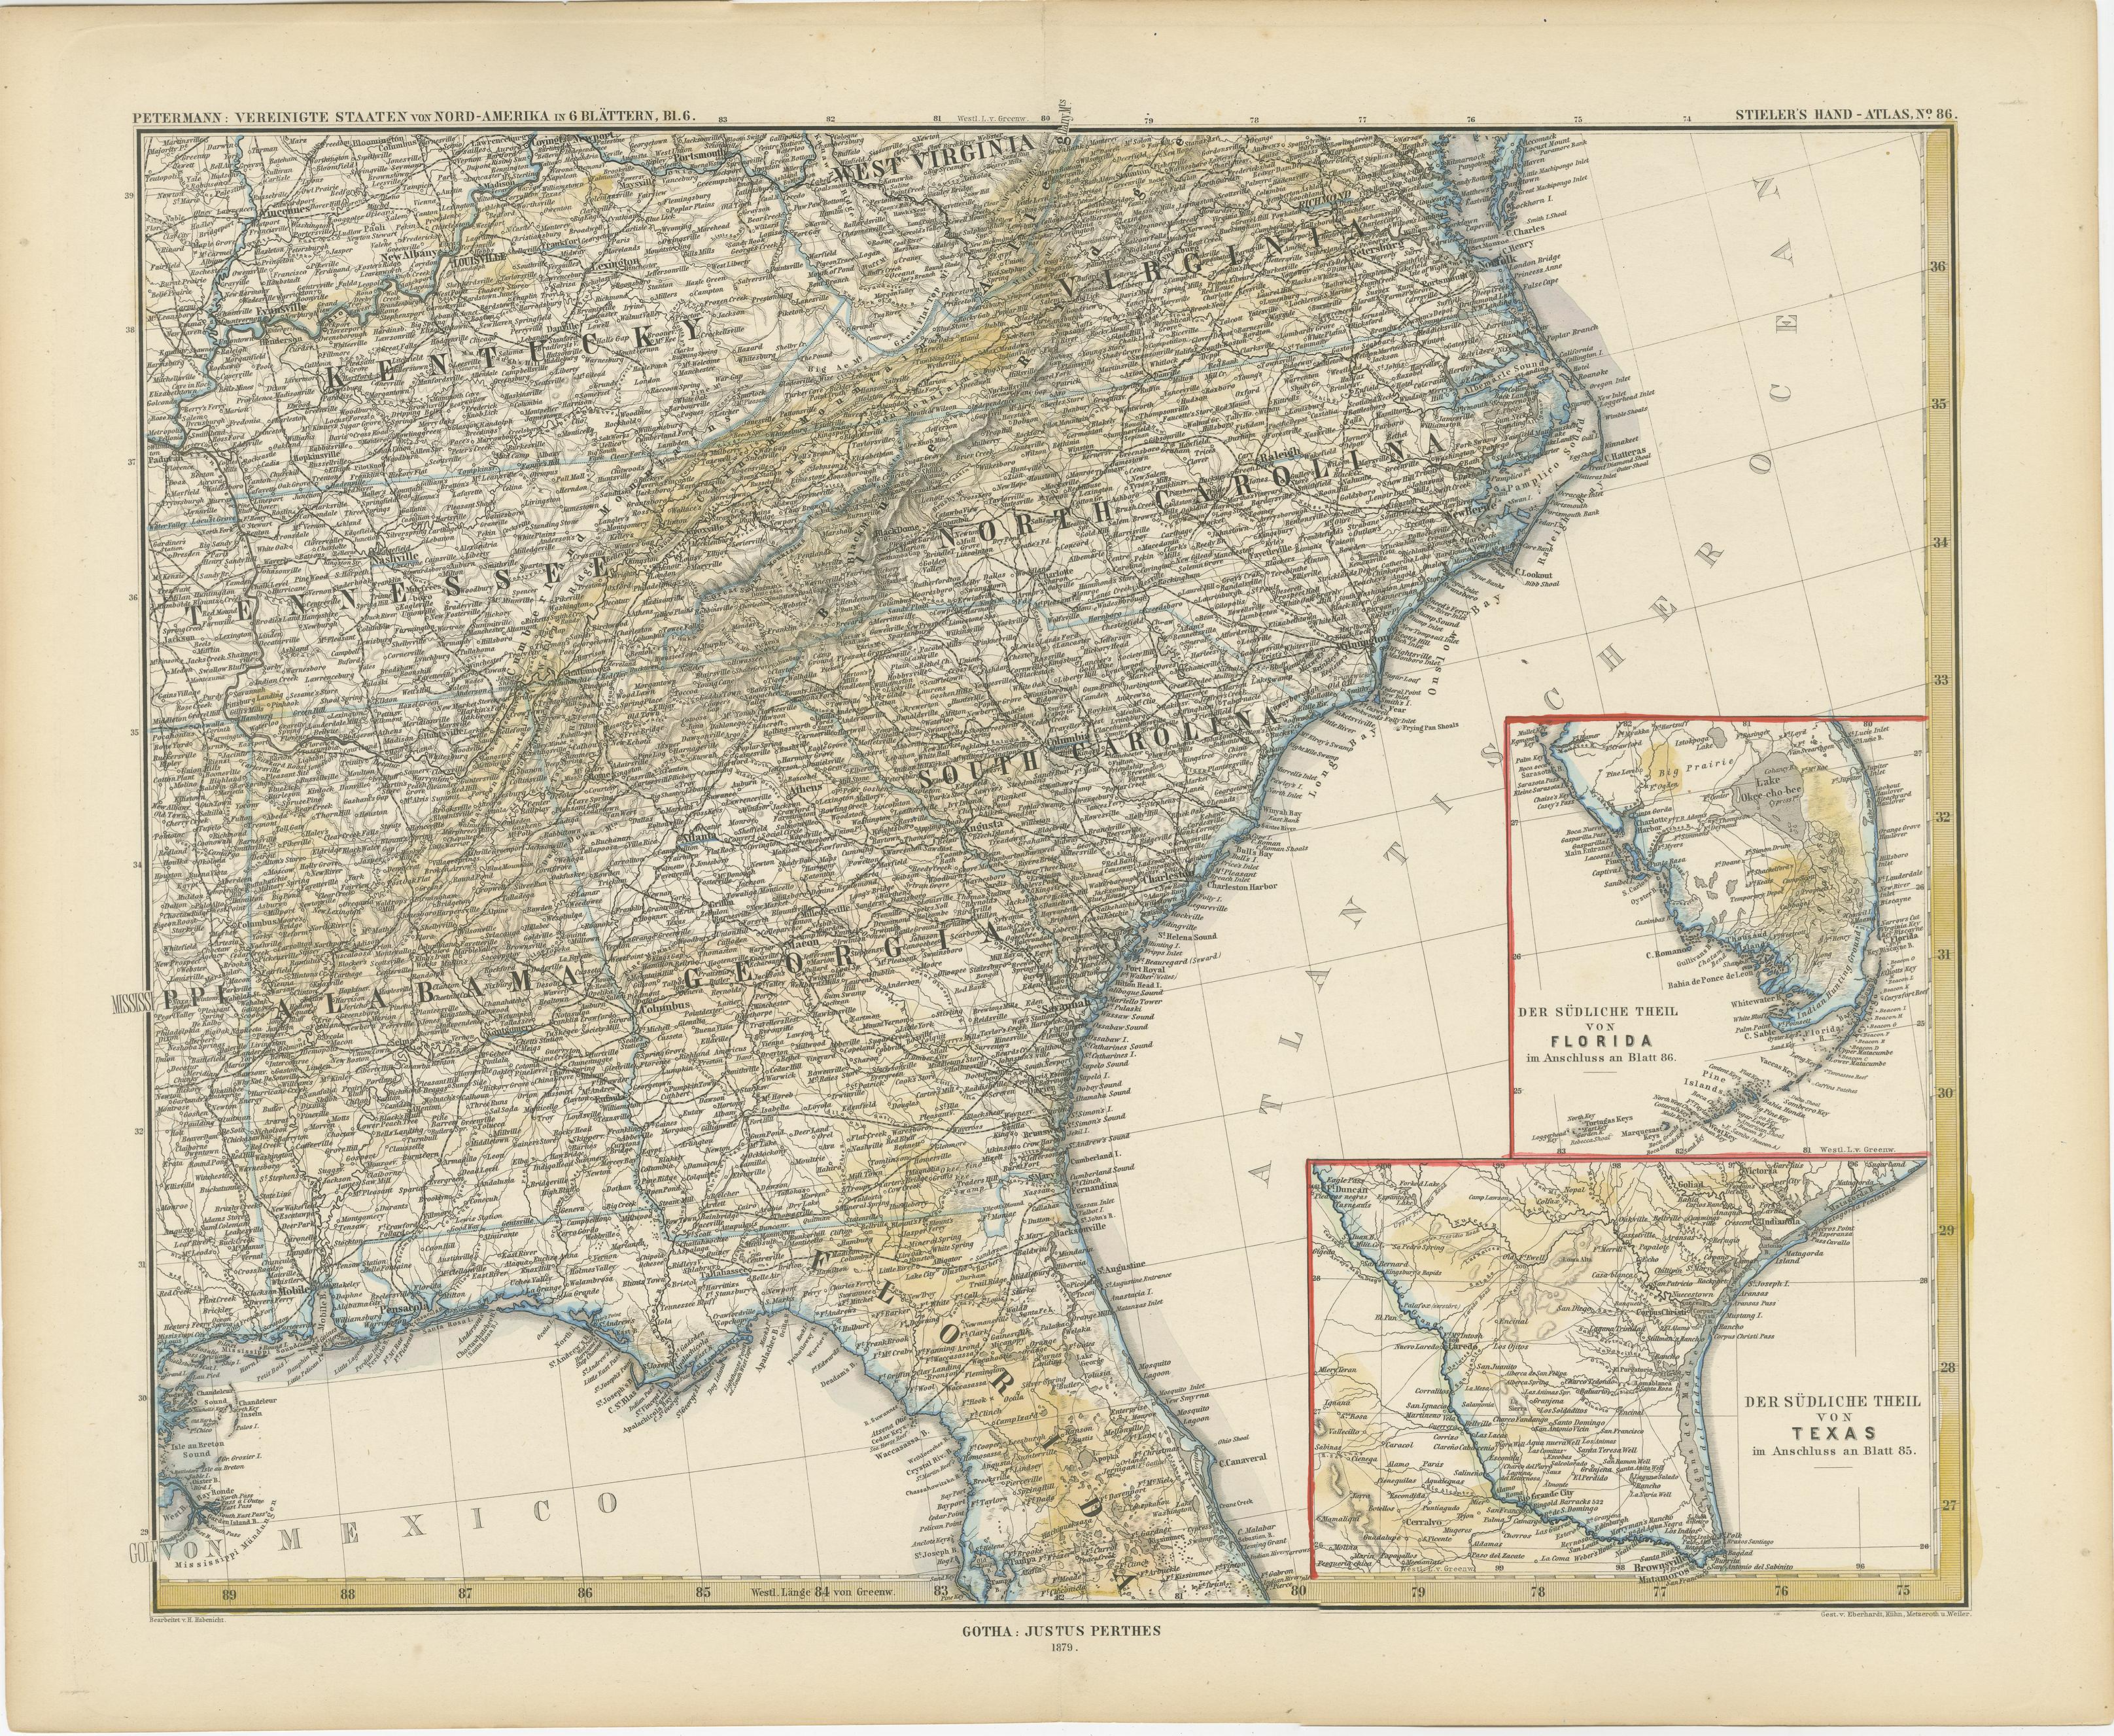 Antique map of part of the United States showing Alabama, Georgia, North Carolina, South Carolina, Tennessee, Kentucky, Virginia and part of Florida. With inset maps of the southern part of Florida and the southern part of Texas. This map was part